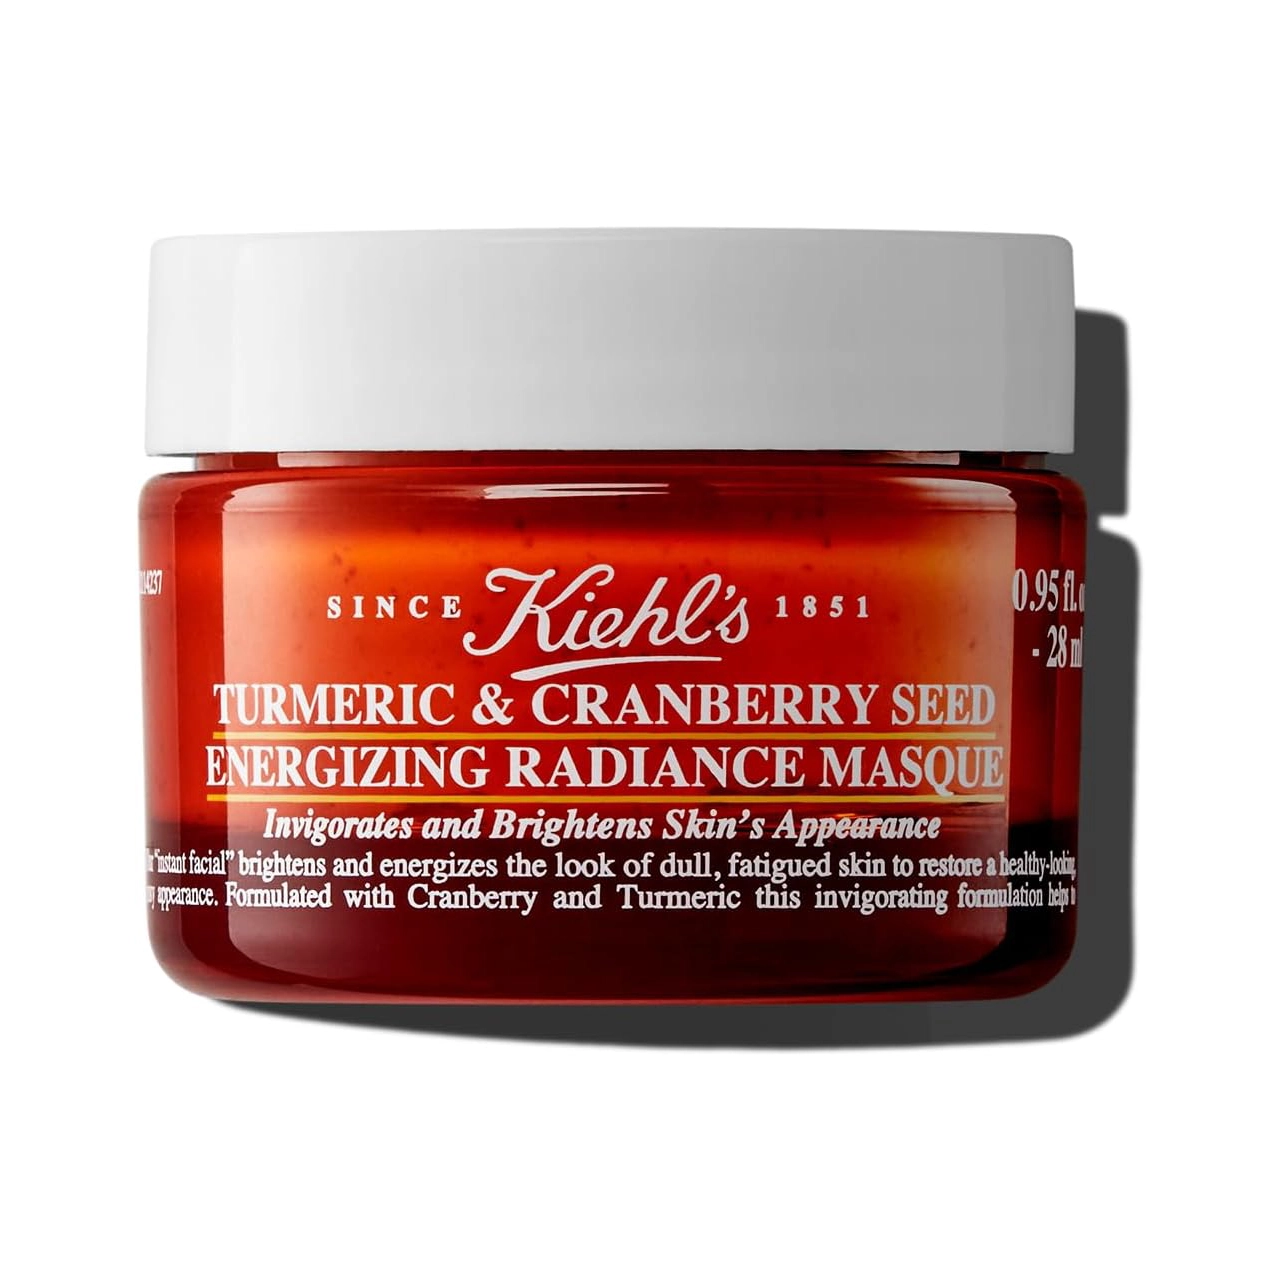 Jar of Kiehl’s Turmeric & Cranberry Seed Energizing Radiance Mask against a white background